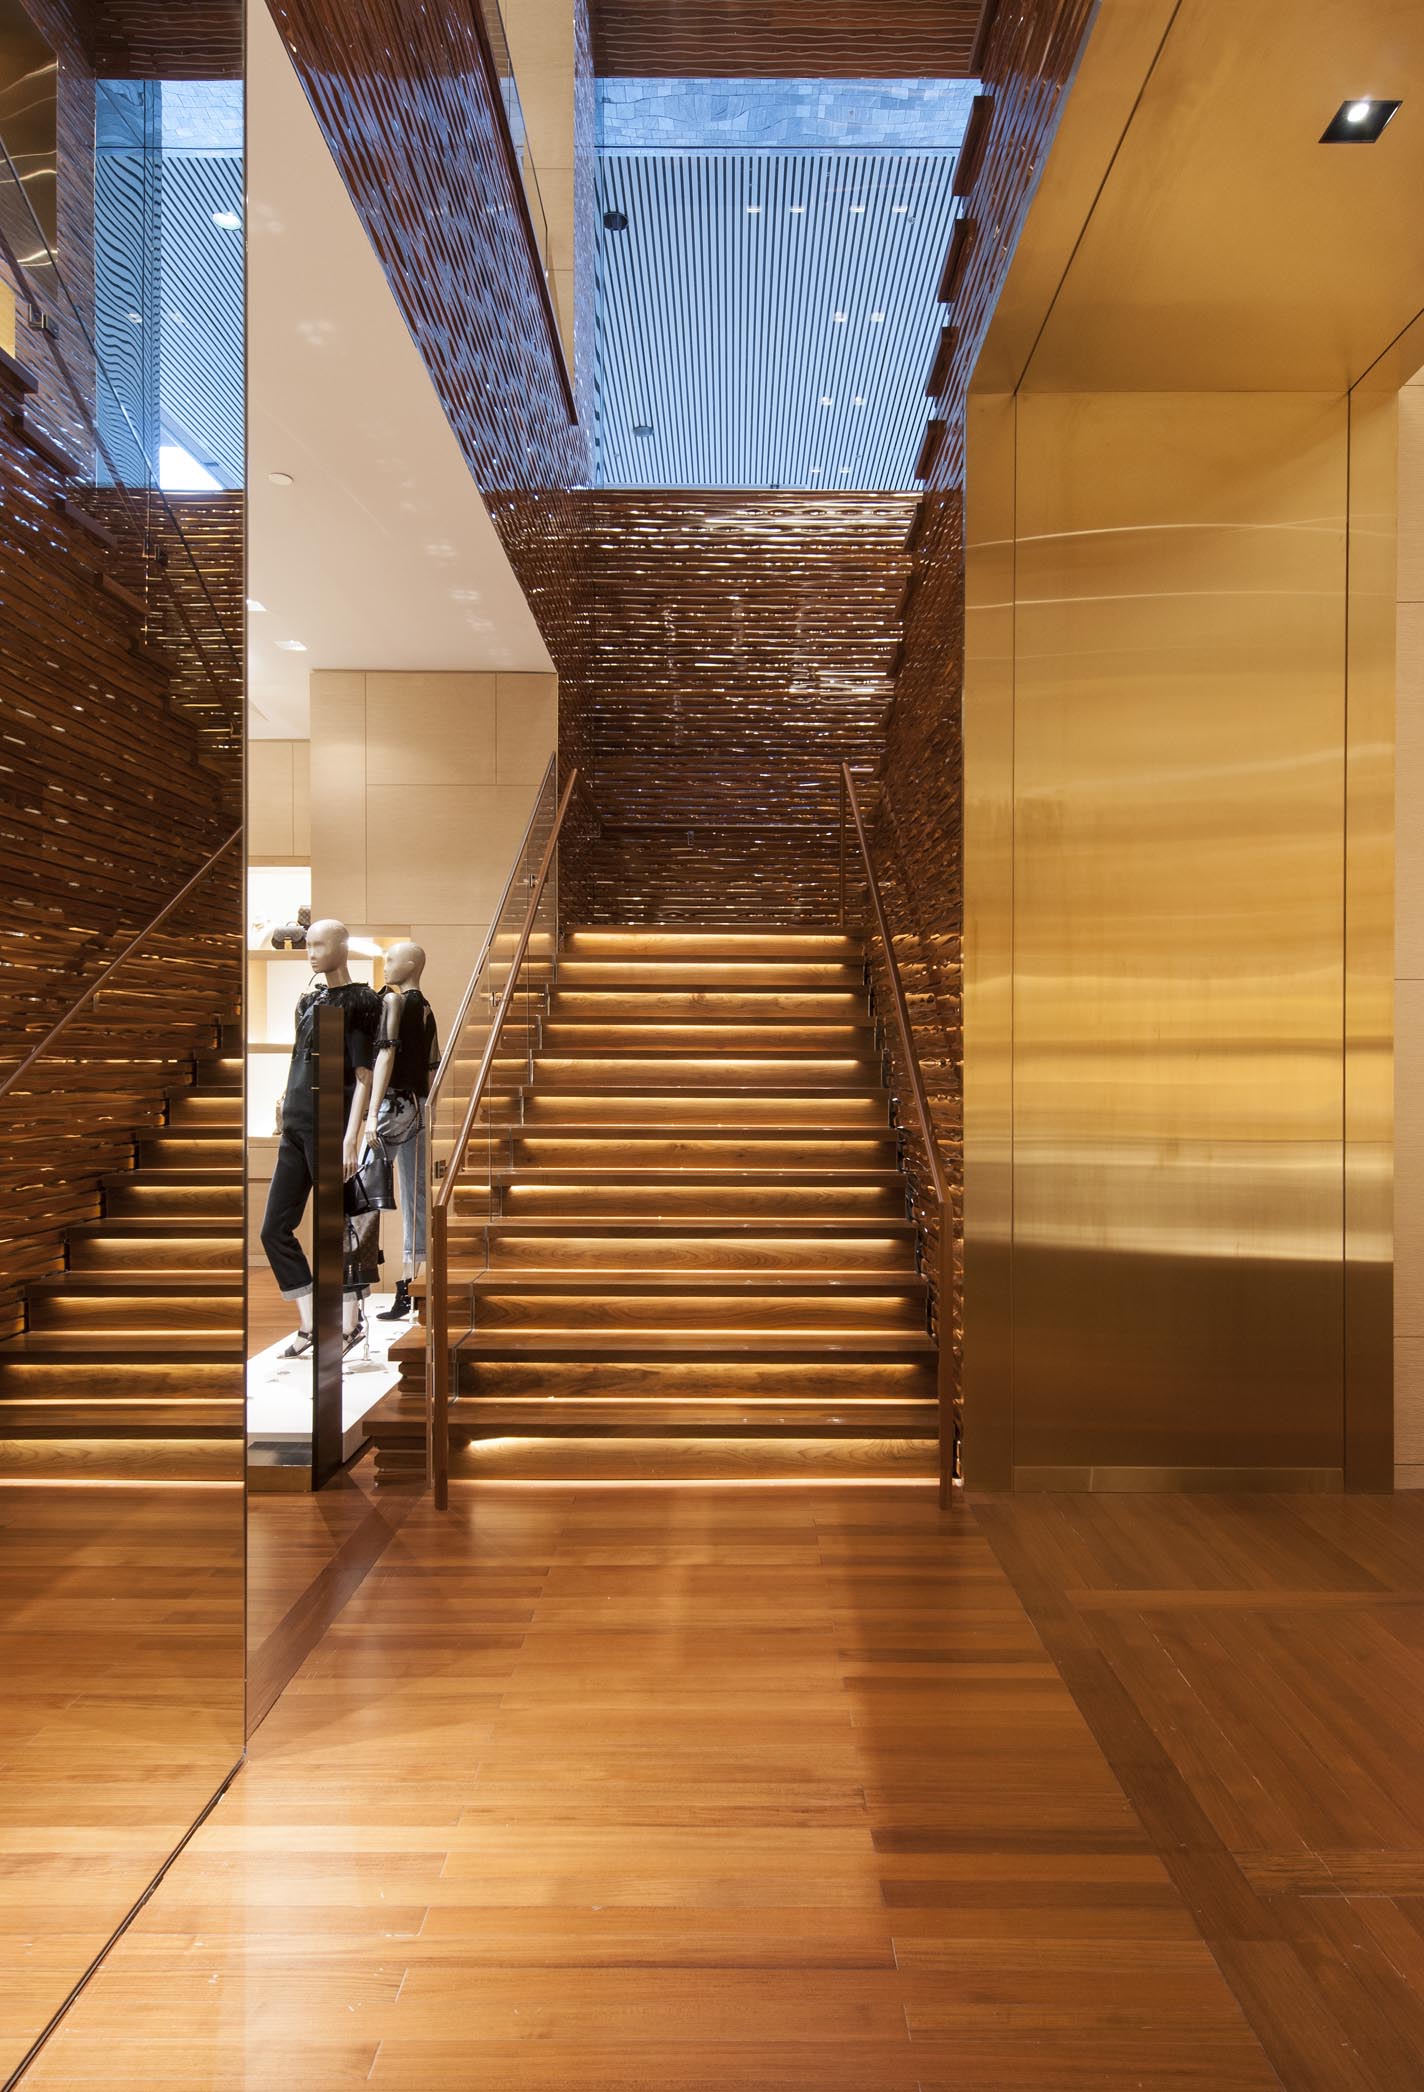 LOUIS VUITTON REGIONAL CORPORATE OFFICES — WINICK ARCHITECTS